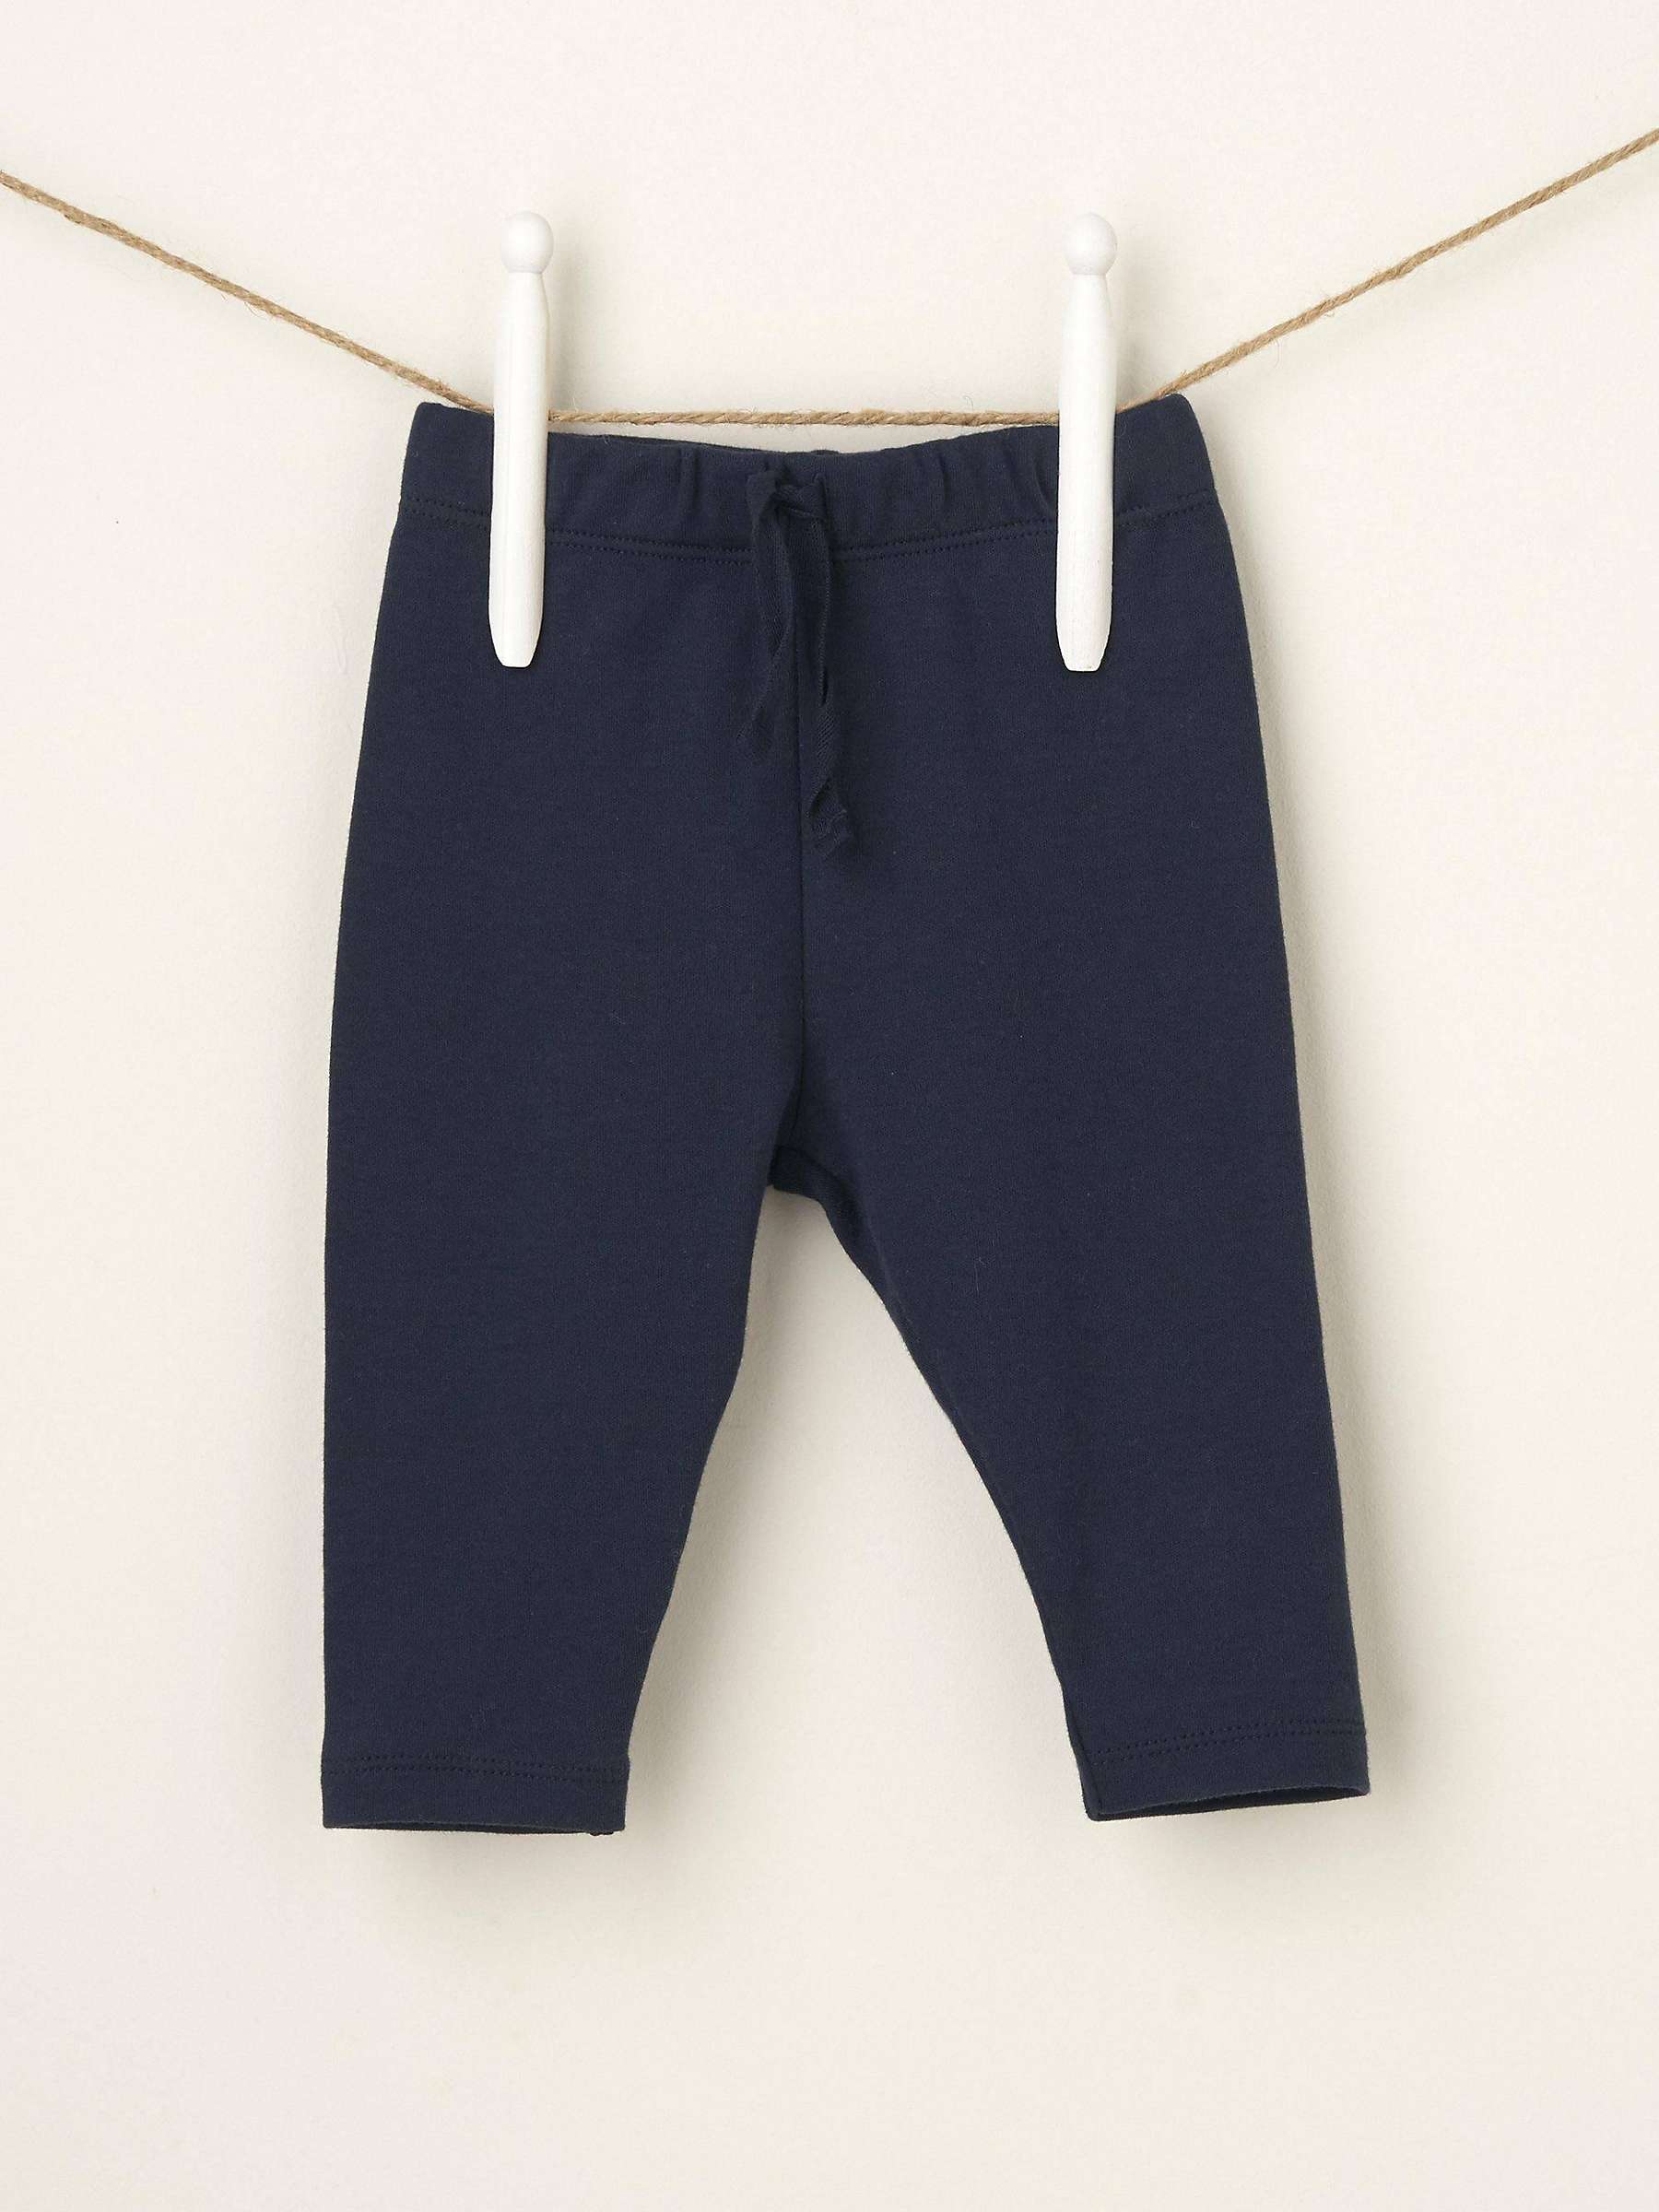 Buy Truly Baby Leggings, Midnight Online at johnlewis.com